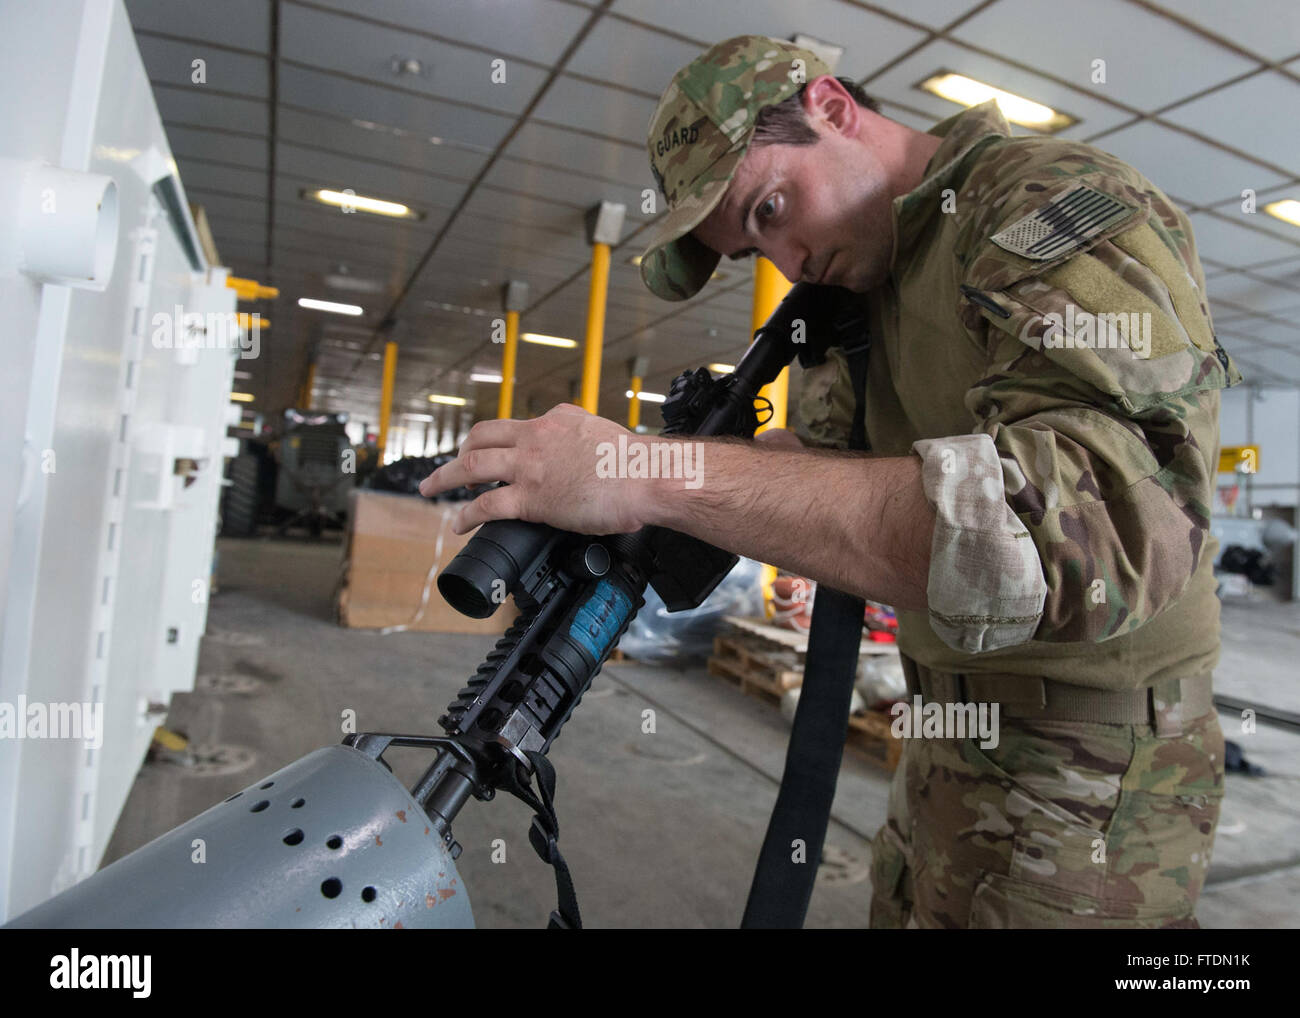 160303-N-QF605-296 ATLANTIC OCEAN (March 3, 2016) Maritime Enforcement Specialist 1st Class Glenn Hyzak, a U.S. Coast Guard Law Enforcement Detachment member, performs weapons maintenance aboard USNS Spearhead (T-EPF 1), March 3, 2016. The Military Sealift Command expeditionary fast transport vessel USNS Spearhead is on a scheduled deployment to the U.S. 6th Fleet area of operations to support the international collaborative capacity-building program Africa Partnership Station. (U.S. Navy photo by Mass Communication Specialist 1st Class Amanda Dunford/Released) Stock Photo